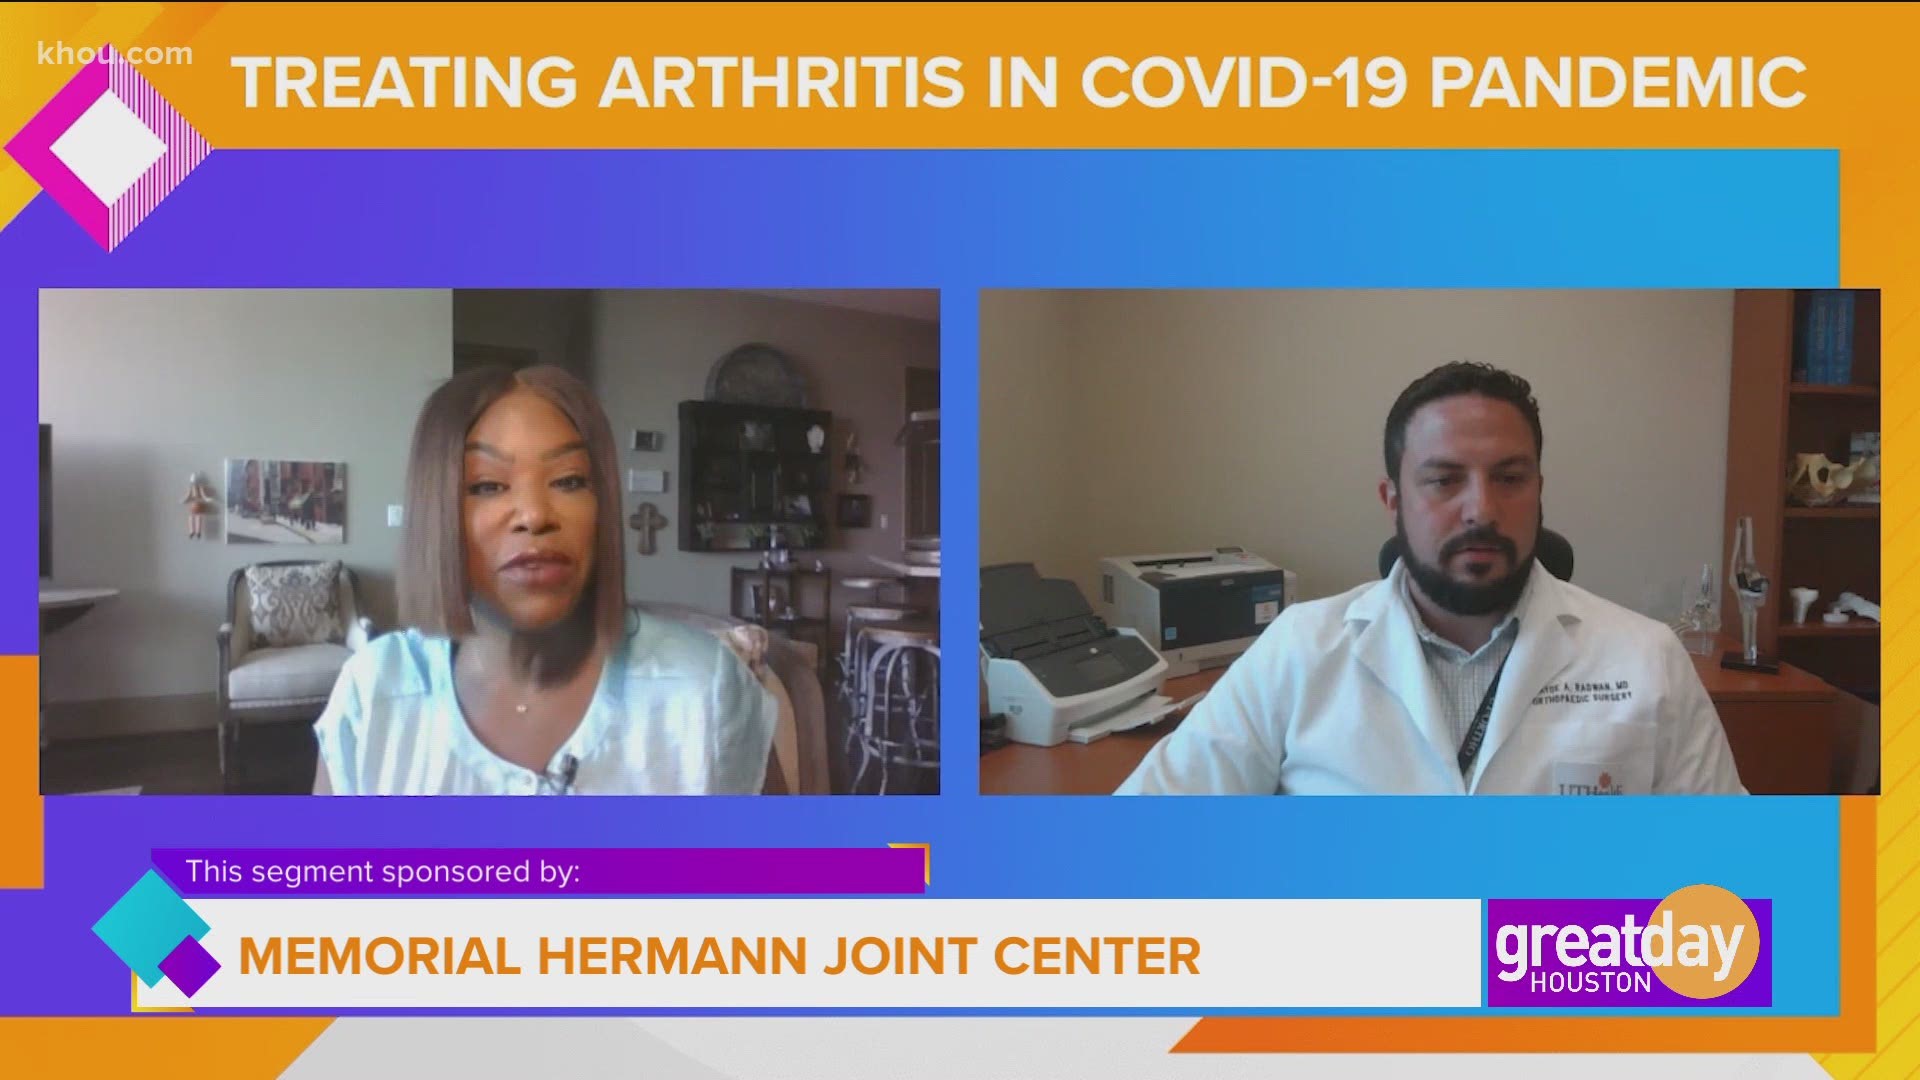 Dr. Zayde Radwan, orthopedic surgeon with Memorial Hermann Joint Center, shared treatment options for those suffering with arthritis.